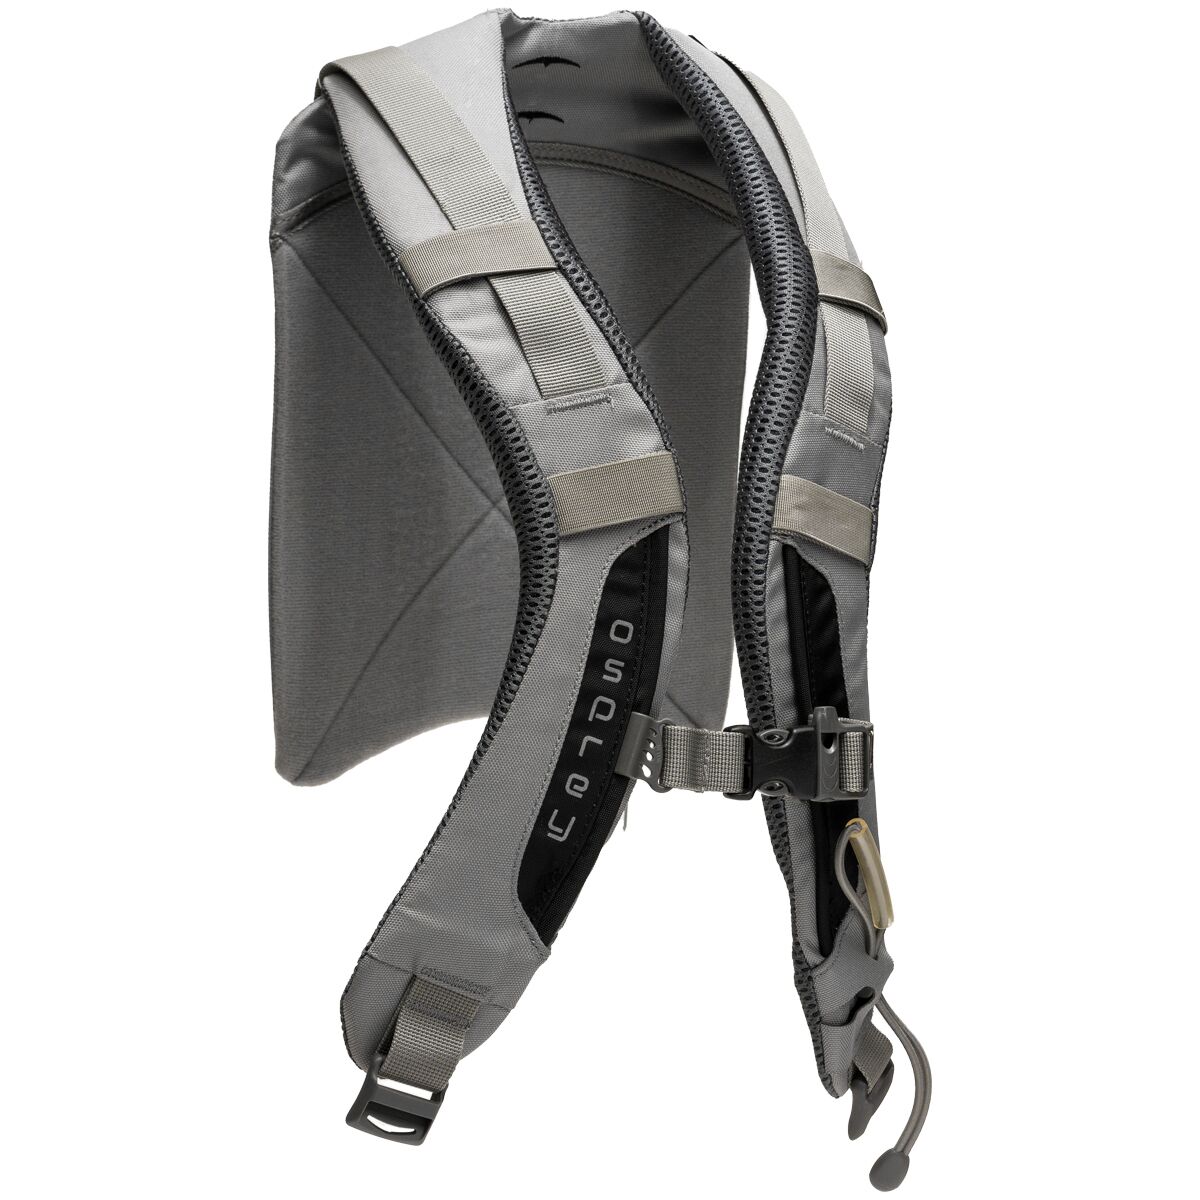 Osprey Packs Aether Pro Harness